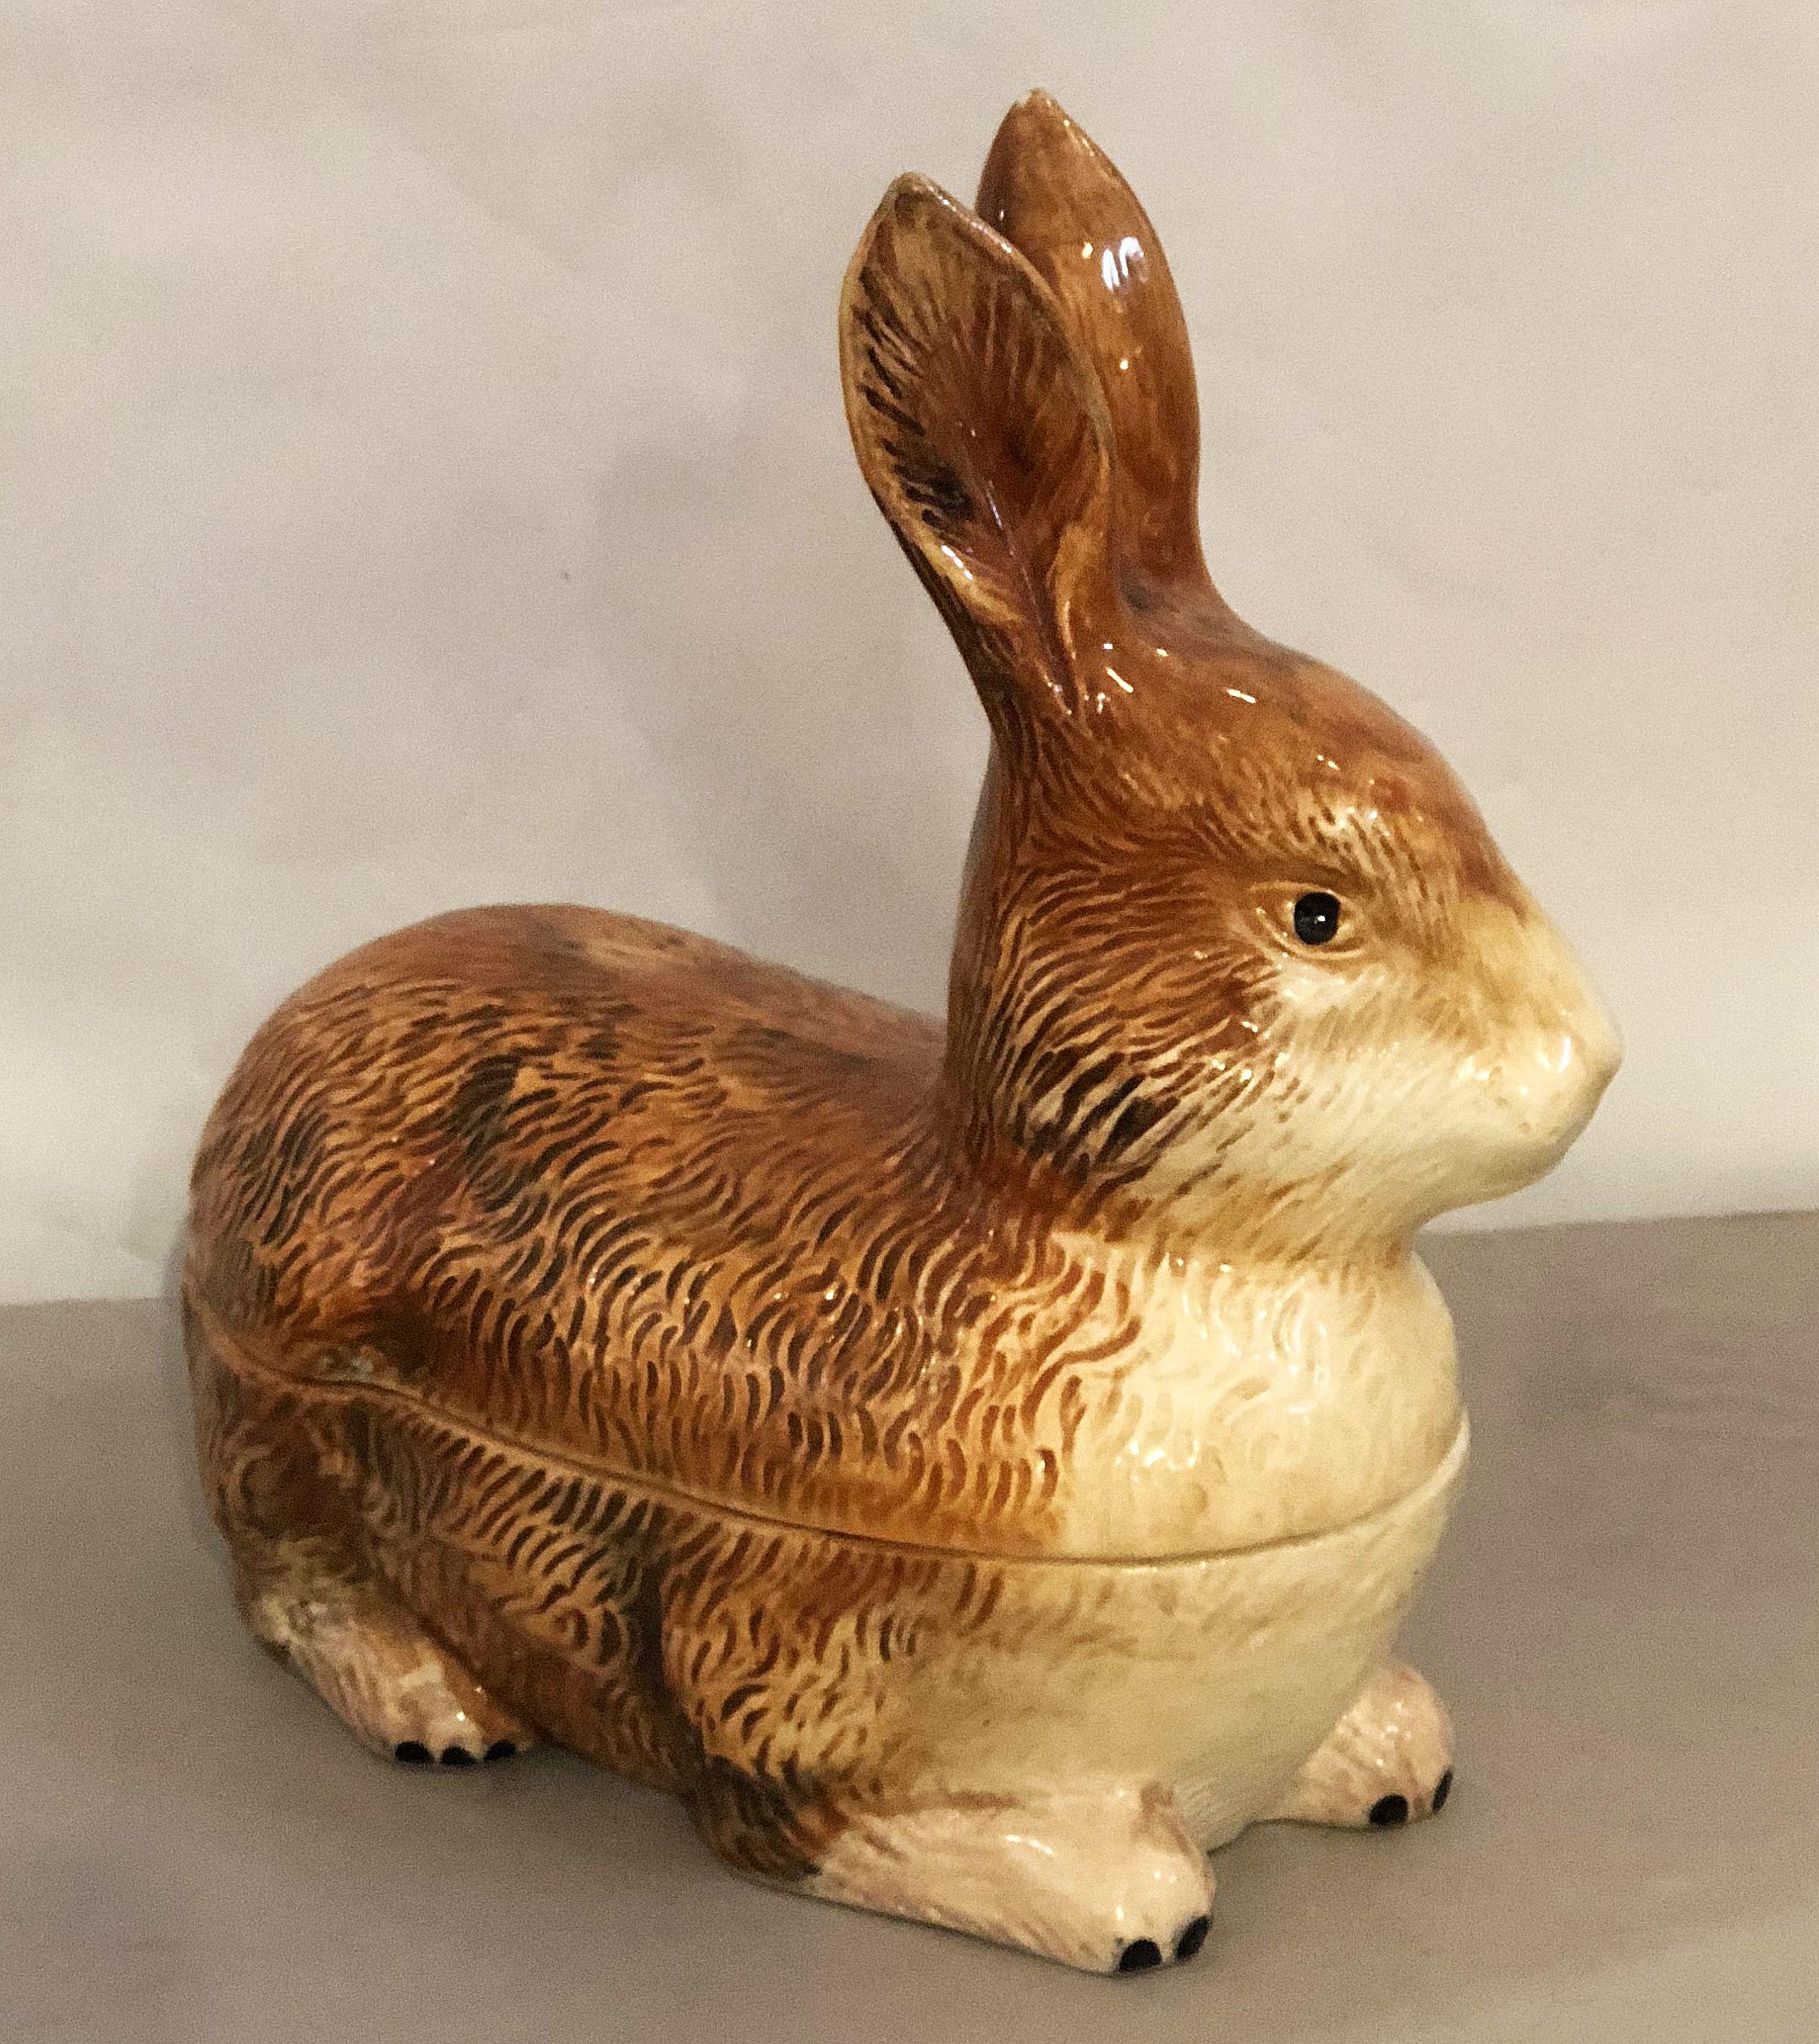 A fine French faience pâté terrine or tureen with lid and under tray in the shape of a rabbit by Michel Caugant.

Caugant signature on bottom.

 